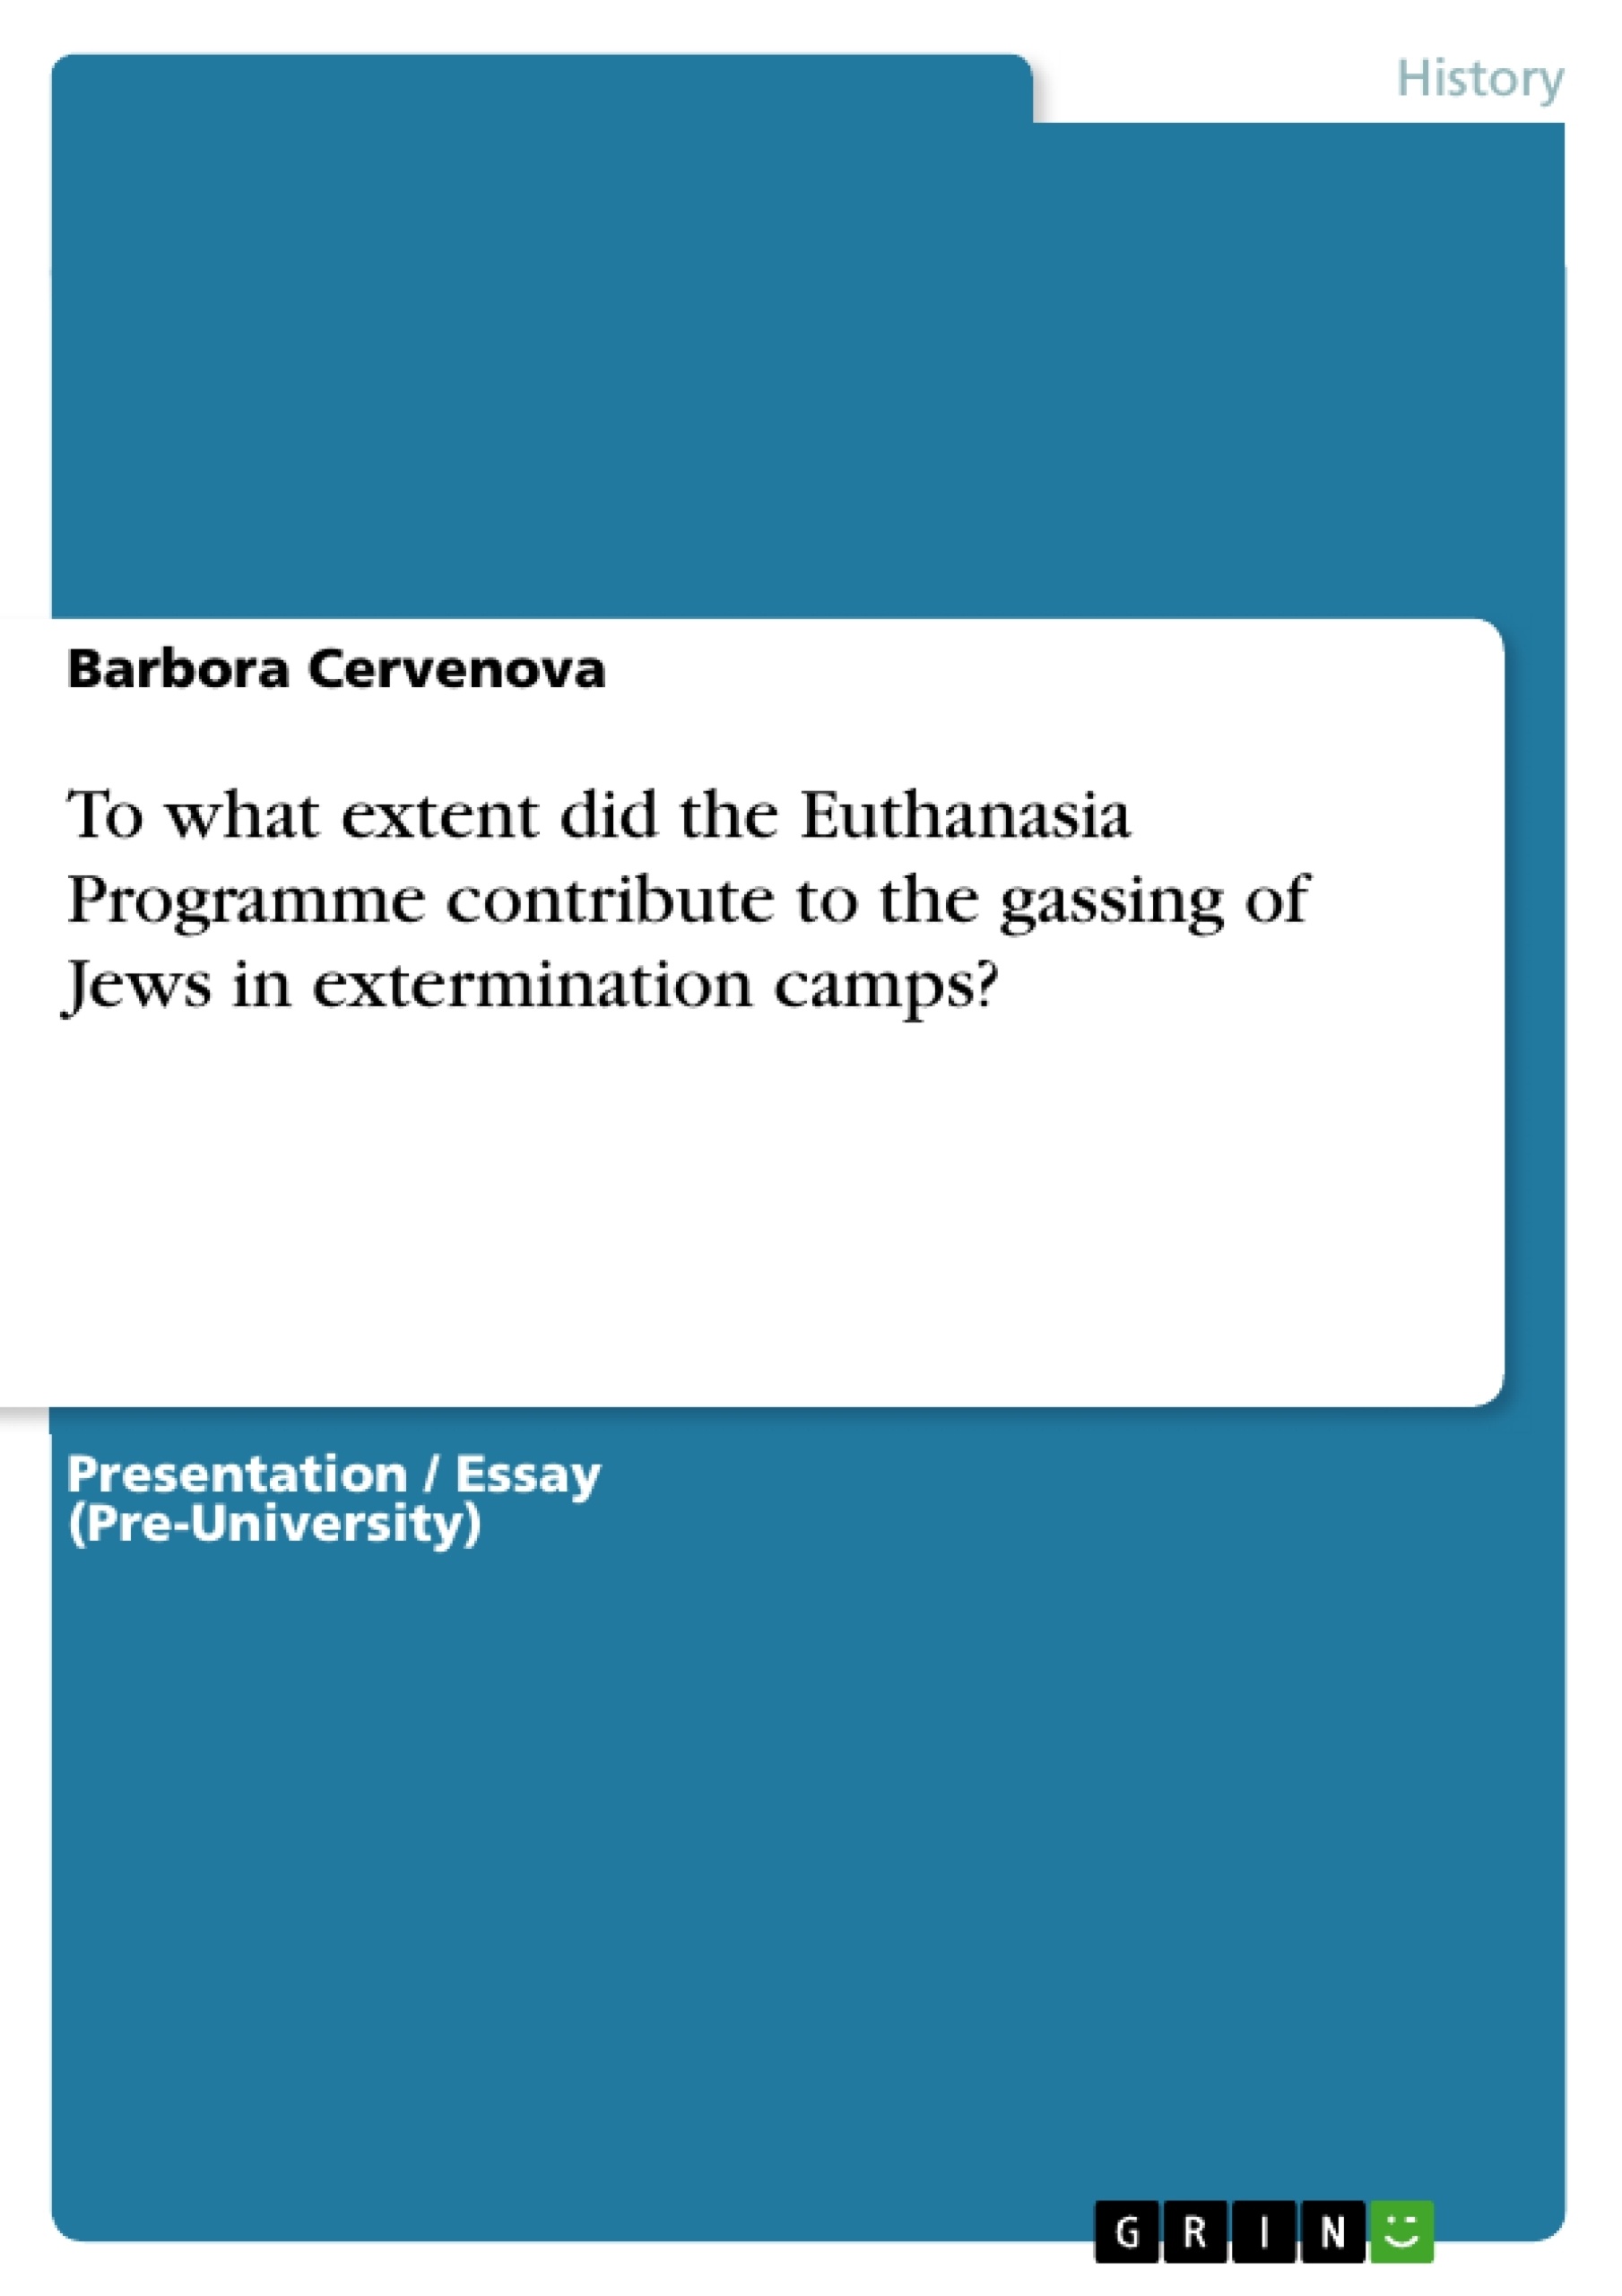 Title: To what extent did the Euthanasia Programme contribute to the gassing of Jews in extermination camps?